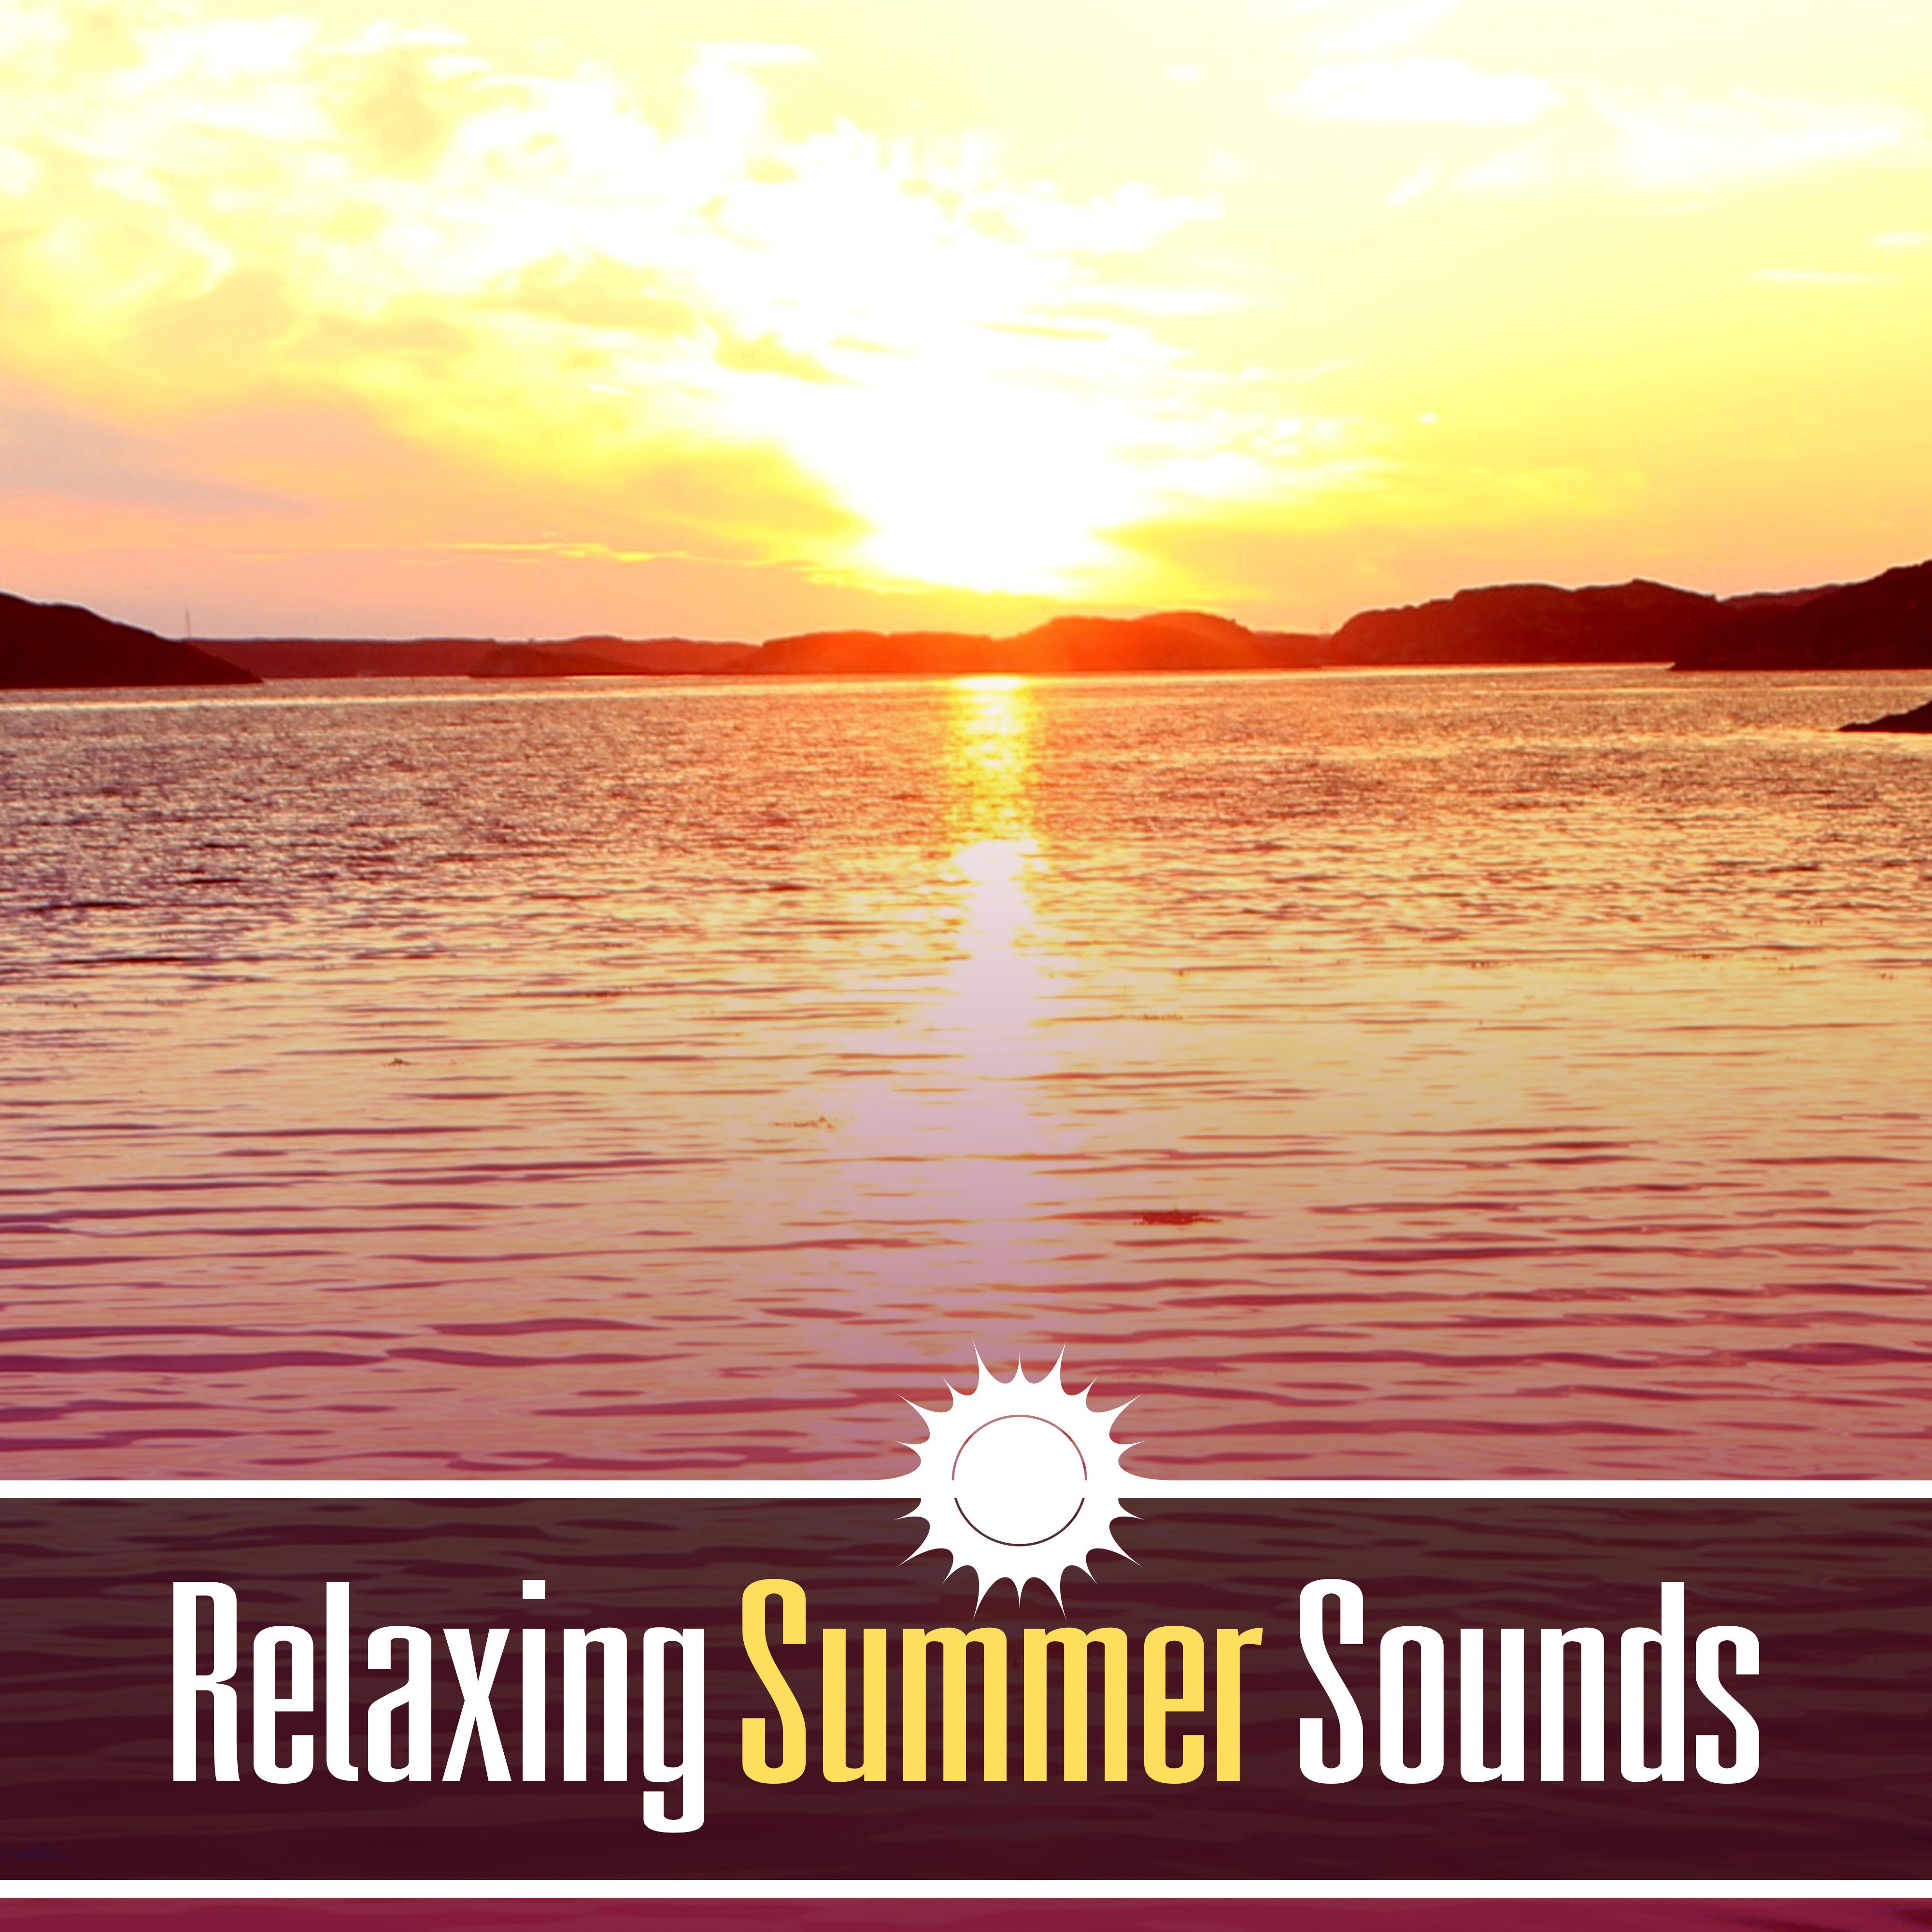 Relaxing Summer Sounds – Holiday Music, Chill Out Vibes, Rest on the Tropical Island, Beach Lounge